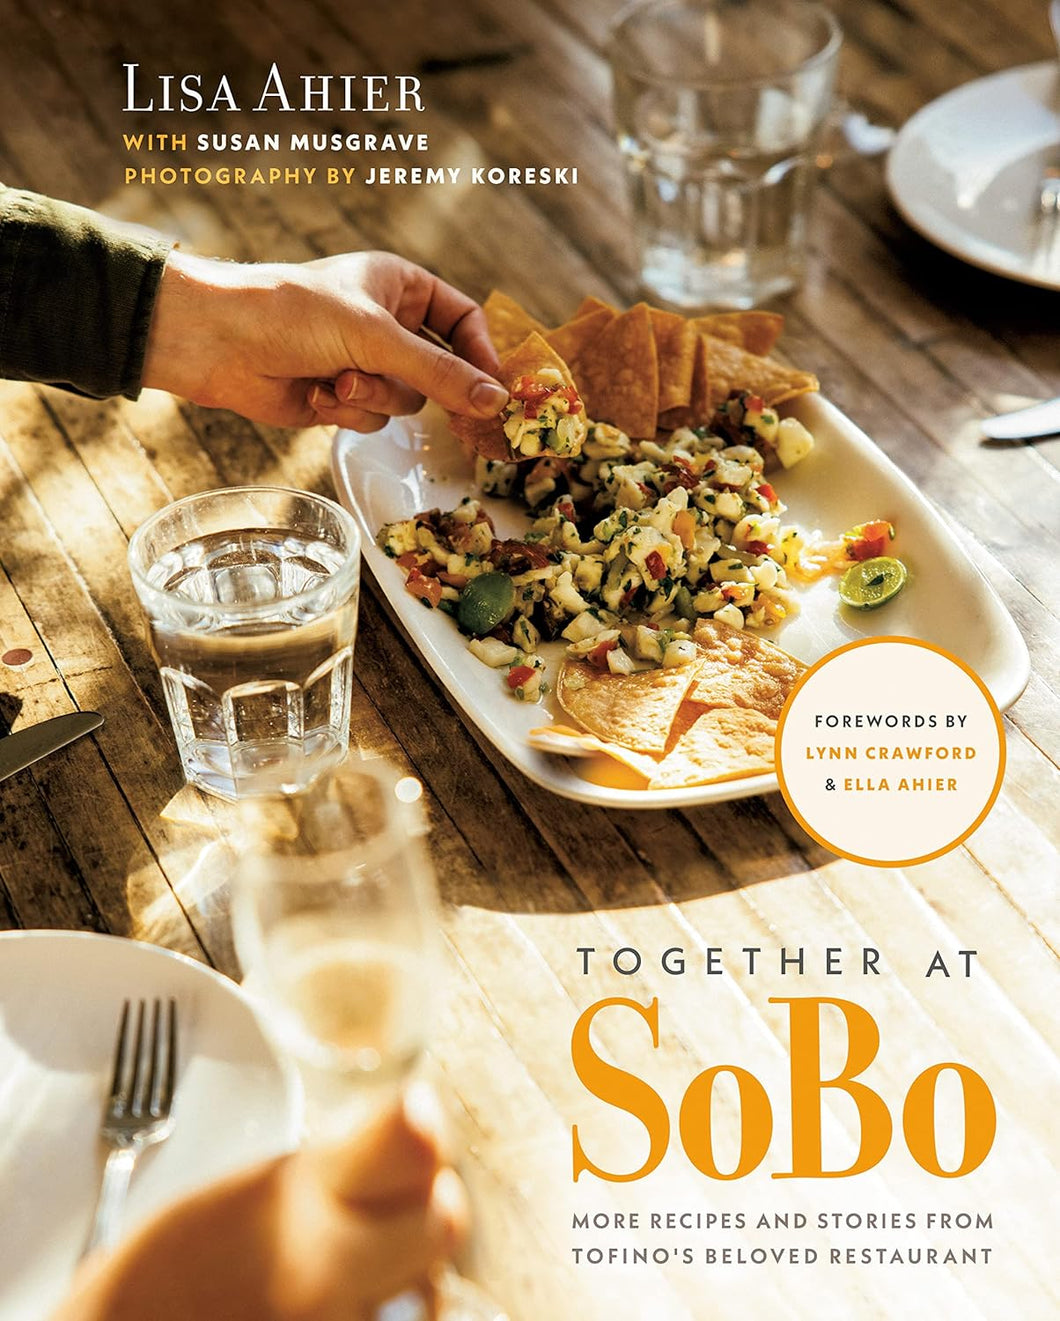 CookBook -Together at SoBo: More Recipes and Stories from Tofino's Beloved Restaurant